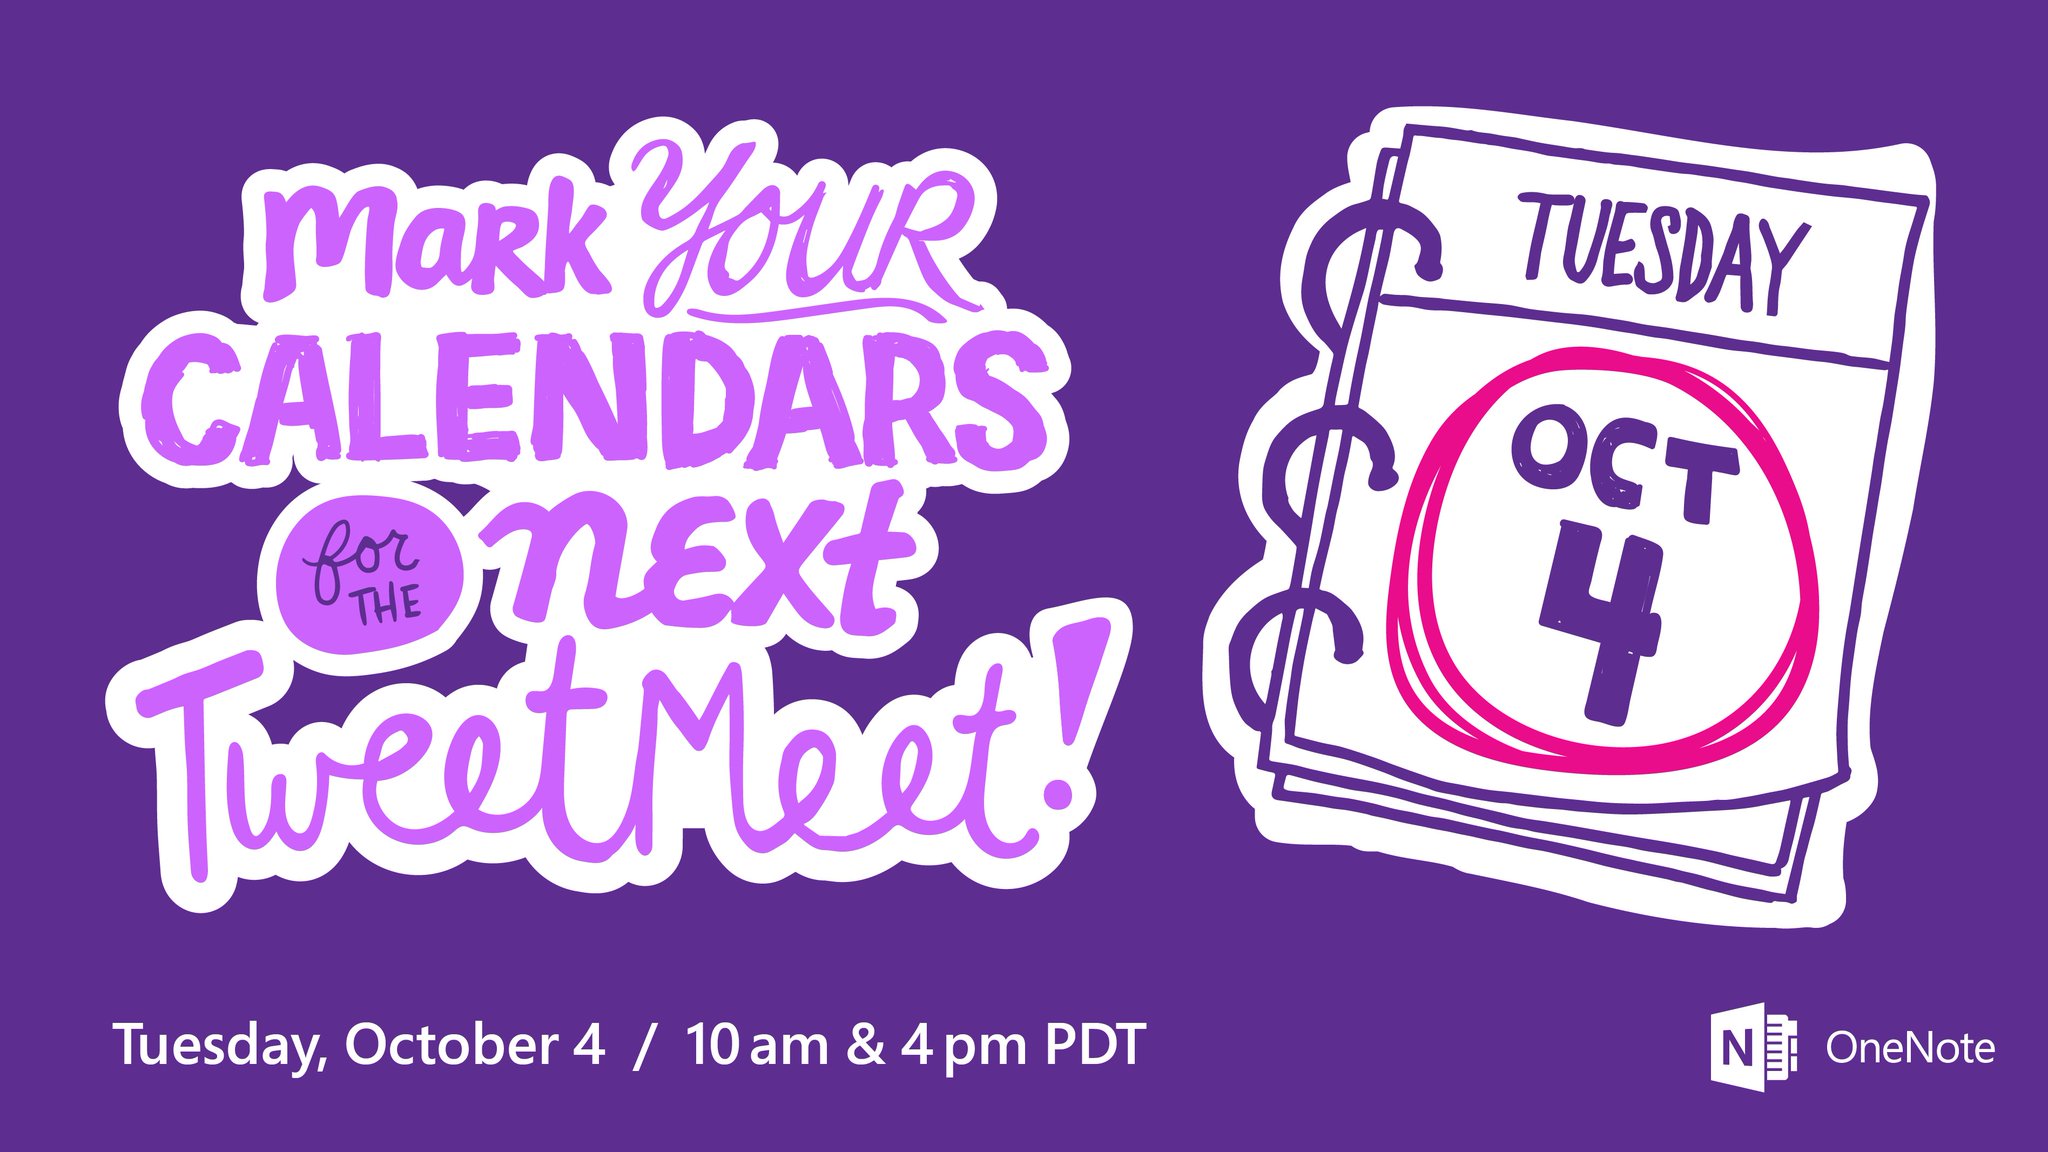 We're having so much fun with these #OneNoteQ TweetMeets, we've marked our calendars already. Will we see you then? https://t.co/jeA6xj3I2I